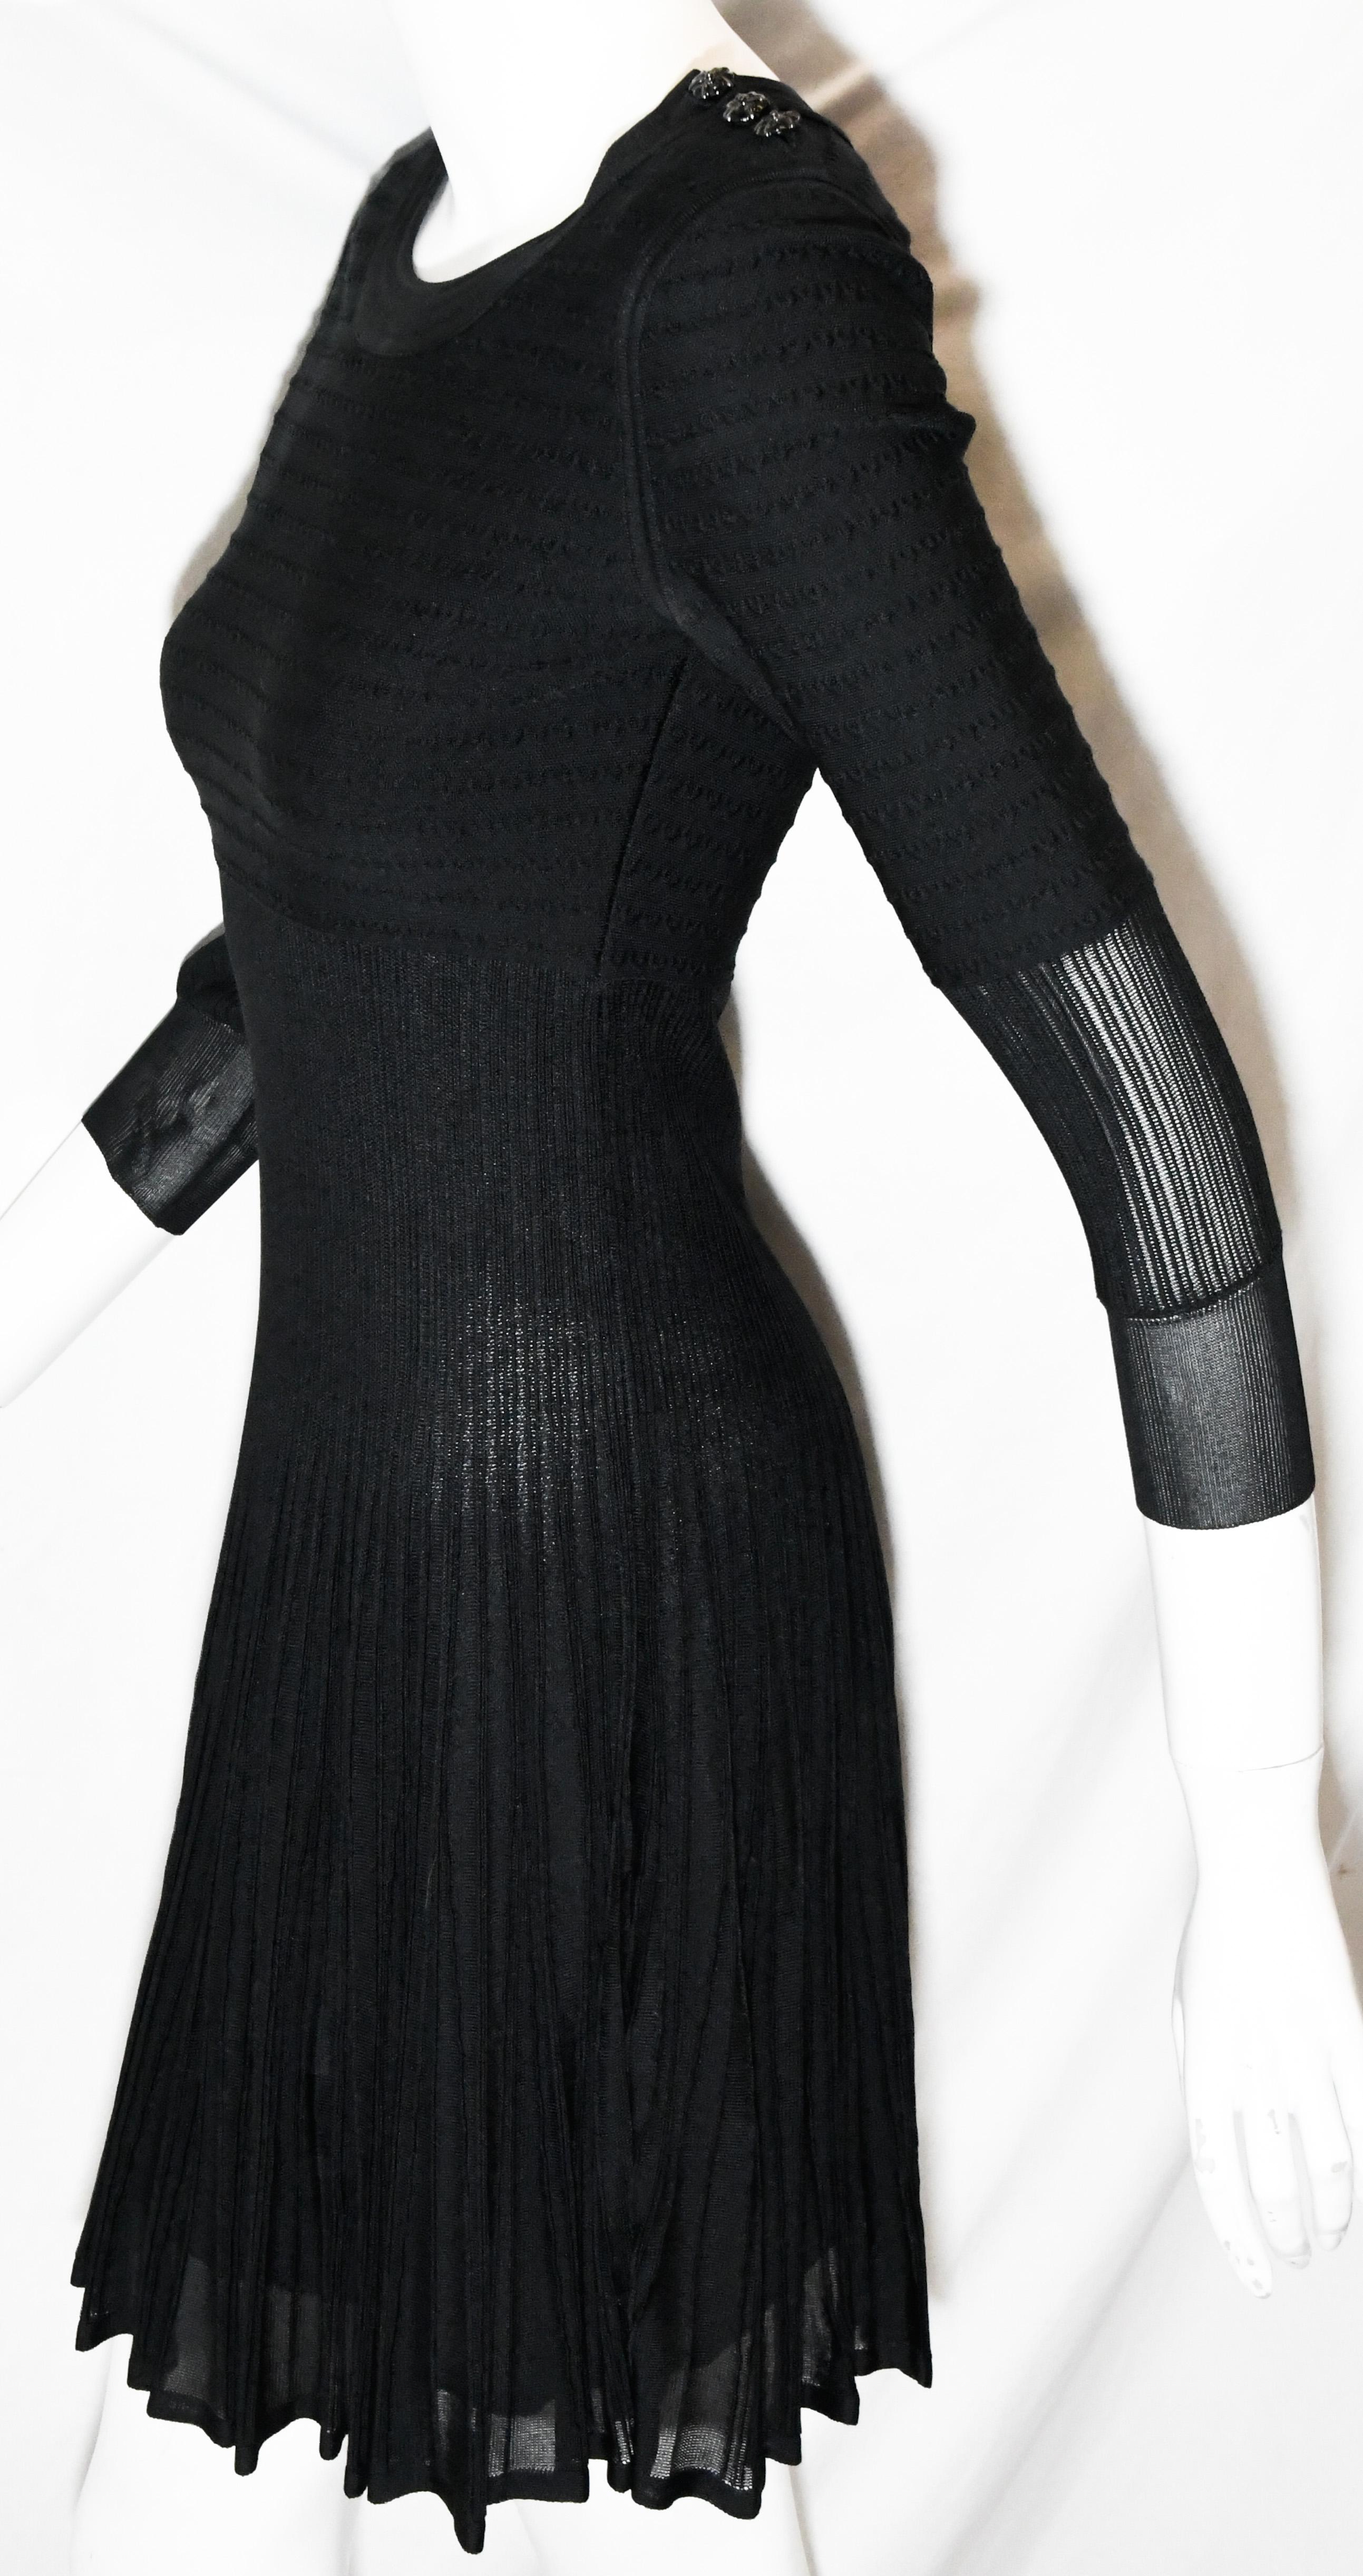 Chanel black knit silk blend dress from the 2009 cruise collection is a runway statement!  Composed with stretch silk and viscose on the upper torso then transitioning to silk ribbed pleats and flaring to a full skirt. The sleeves have the same